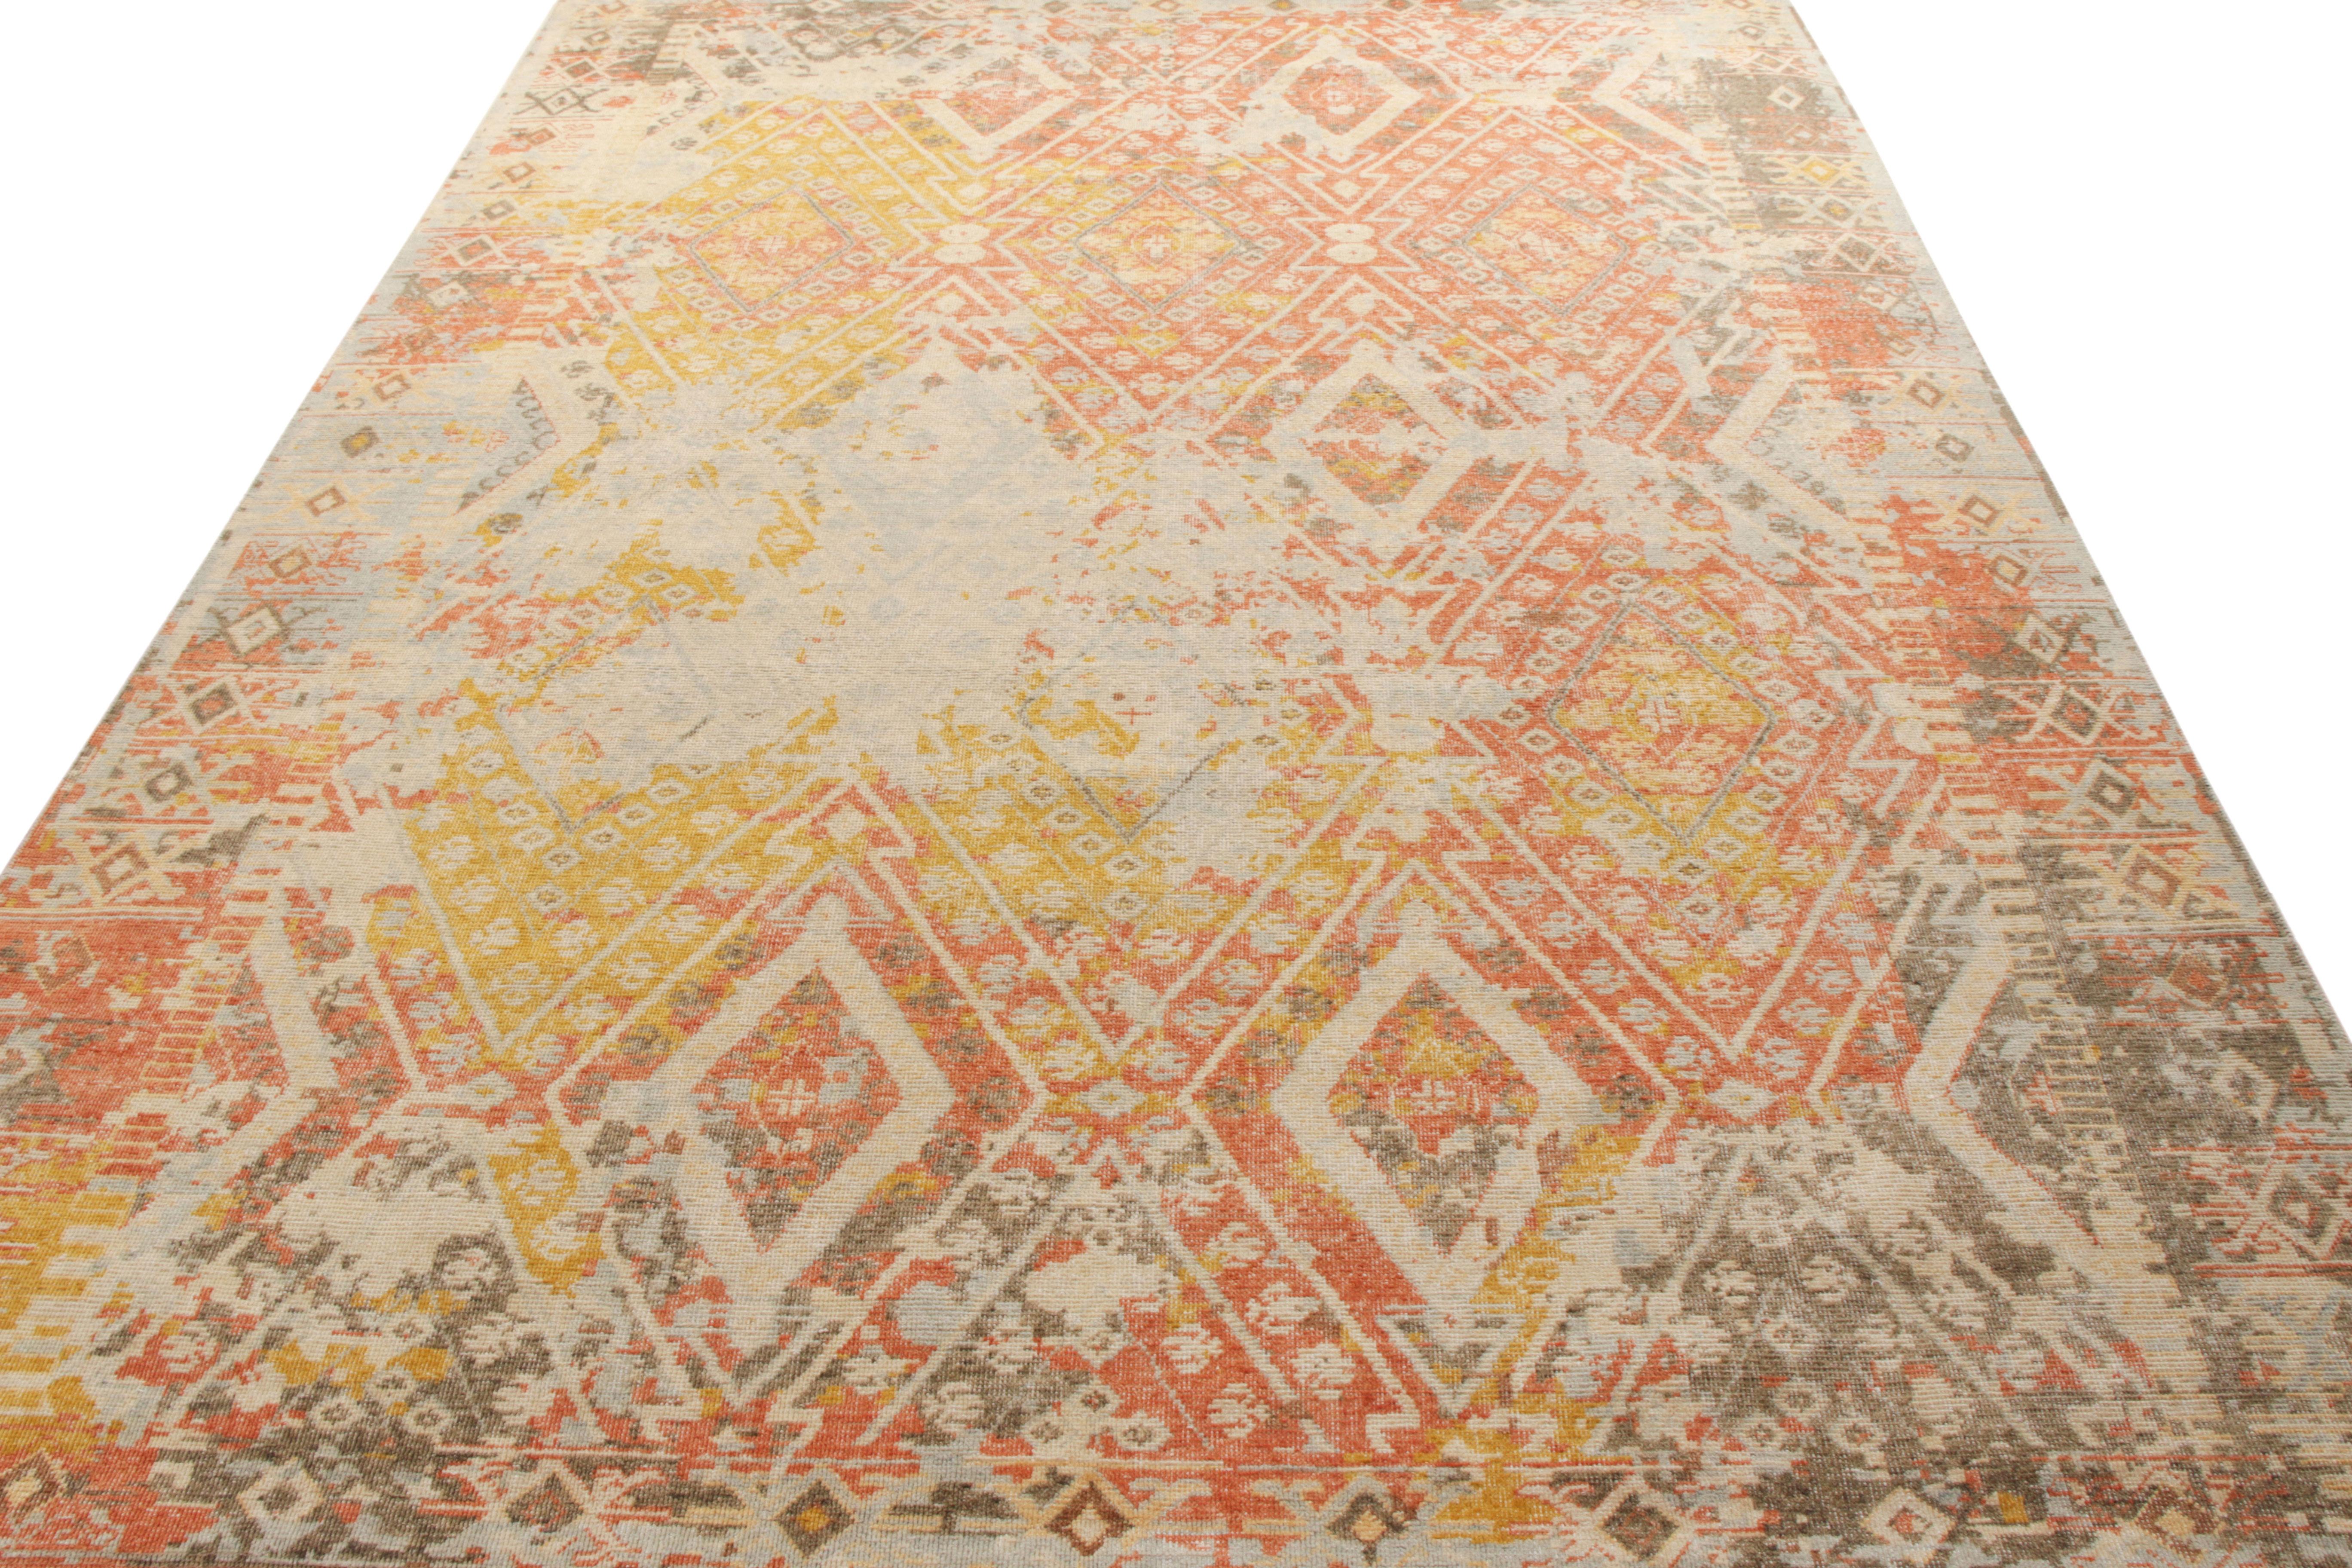 Hand knotted in wool, Rug & Kilim welcomes this scintillating transitional piece to the classic inspirations in their Homage Callection. A 9x12 ode to classic pattern visualising a unique take in its sophisticated distressed style in low-sheared